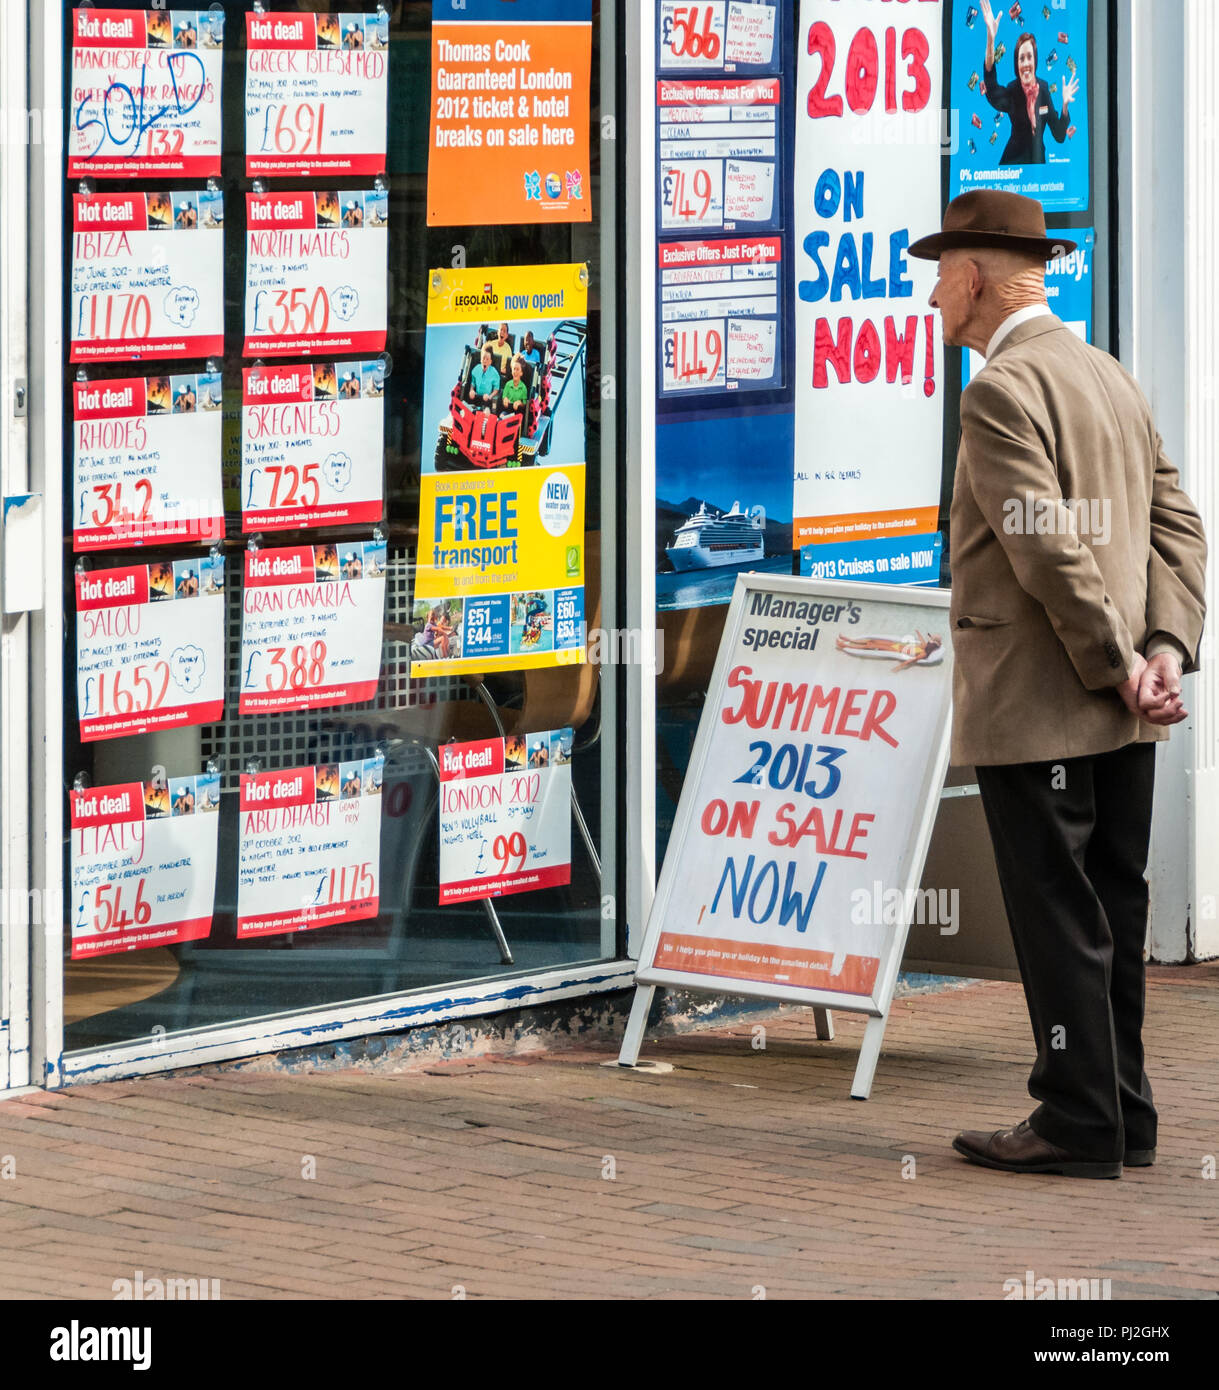 Elderly man looking at holiday offers in a travel agent's shop window in Macclesfield Stock Photo